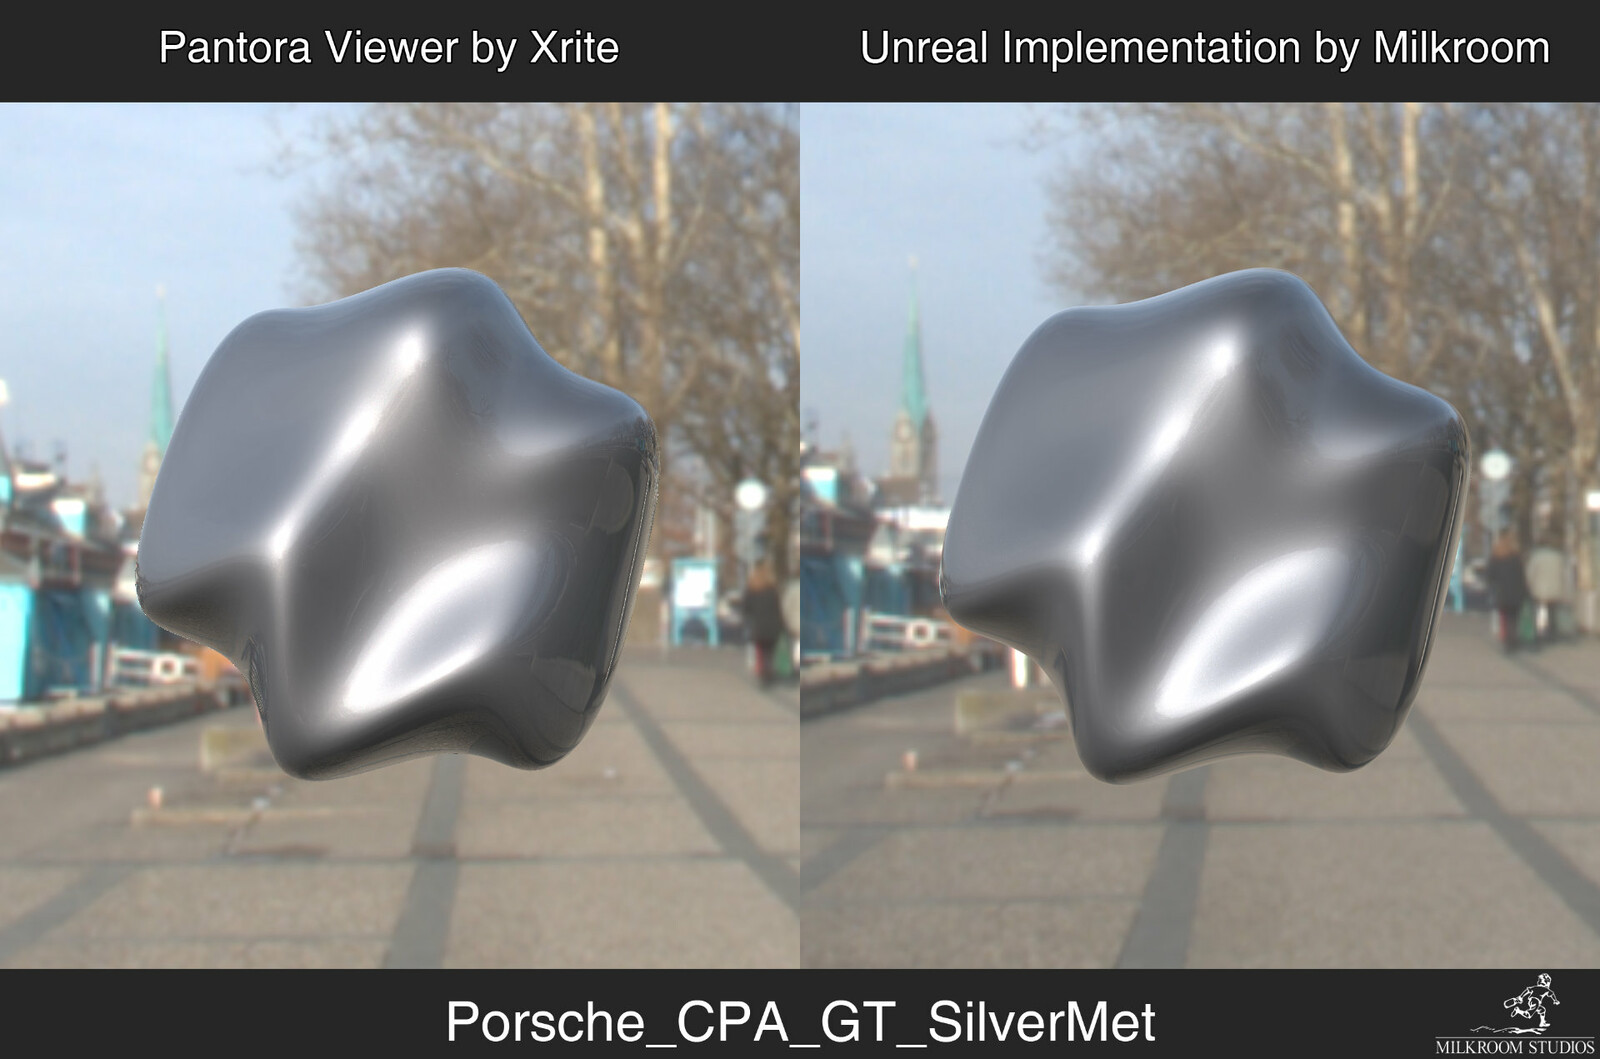 The Unreal implementation compared to the reference, Xrite's Pantora Viewer.